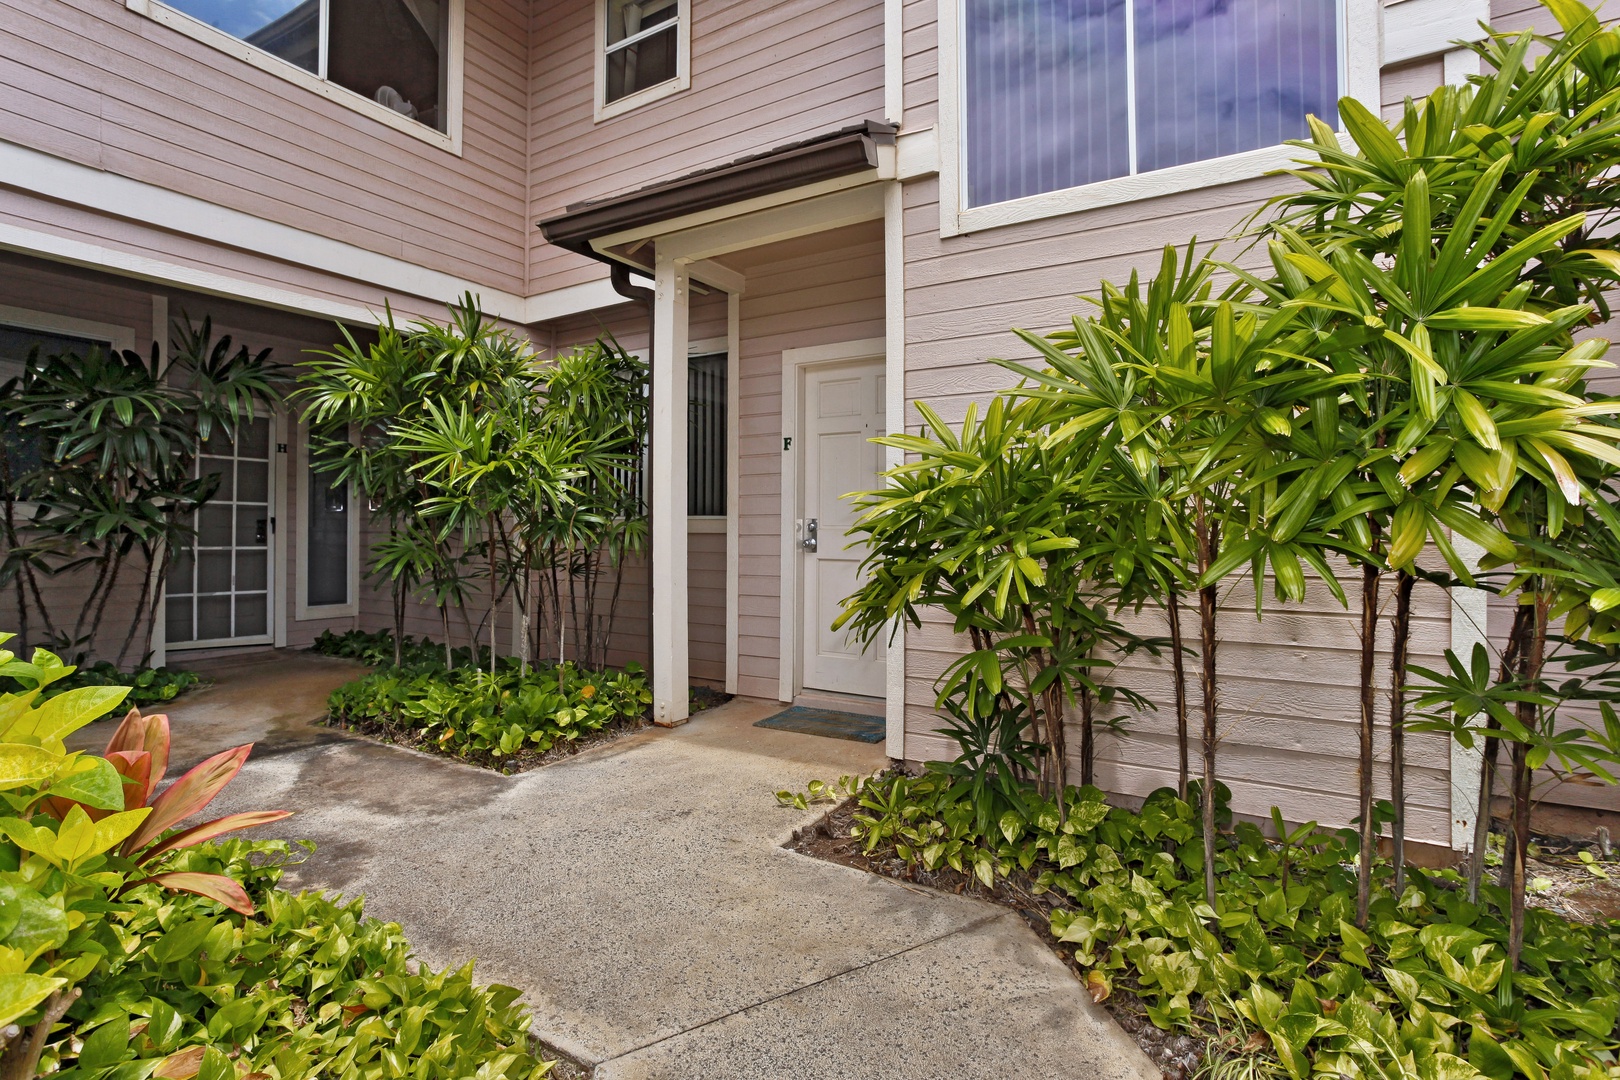 Kapolei Vacation Rentals, Fairways at Ko Olina 33F - The entrance with a paved pathway.